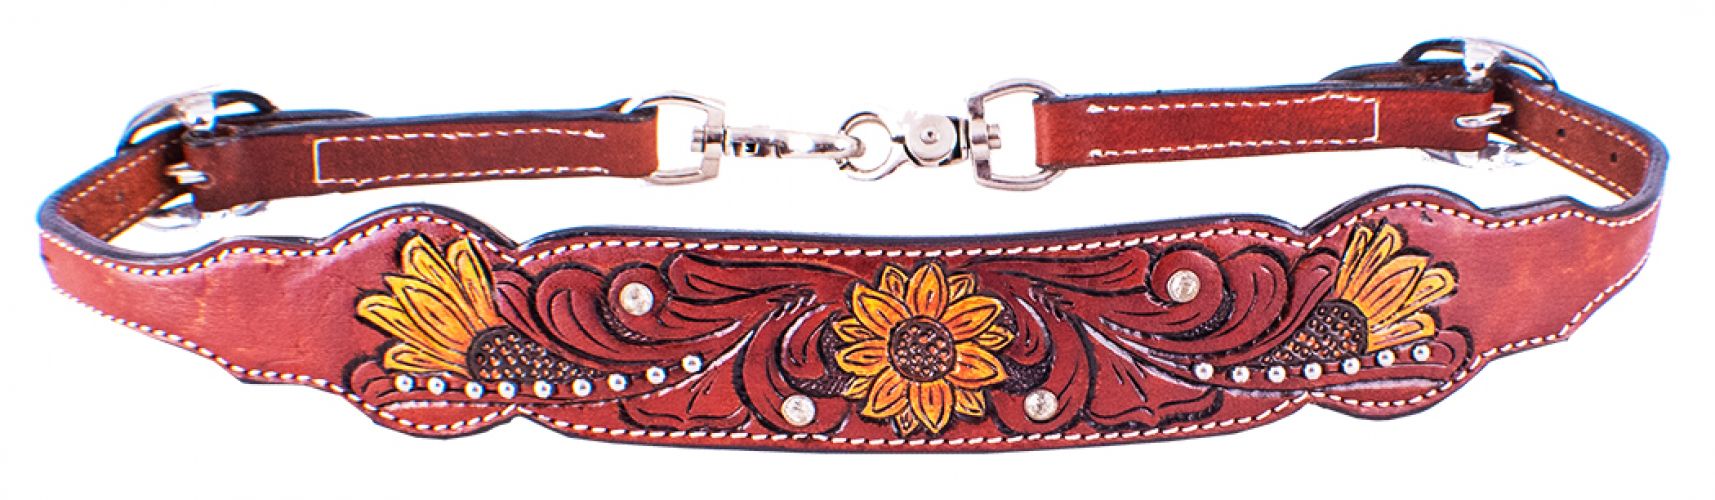 202439: Showman ® Hand Painted Sunflower wither strap Primary Showman   